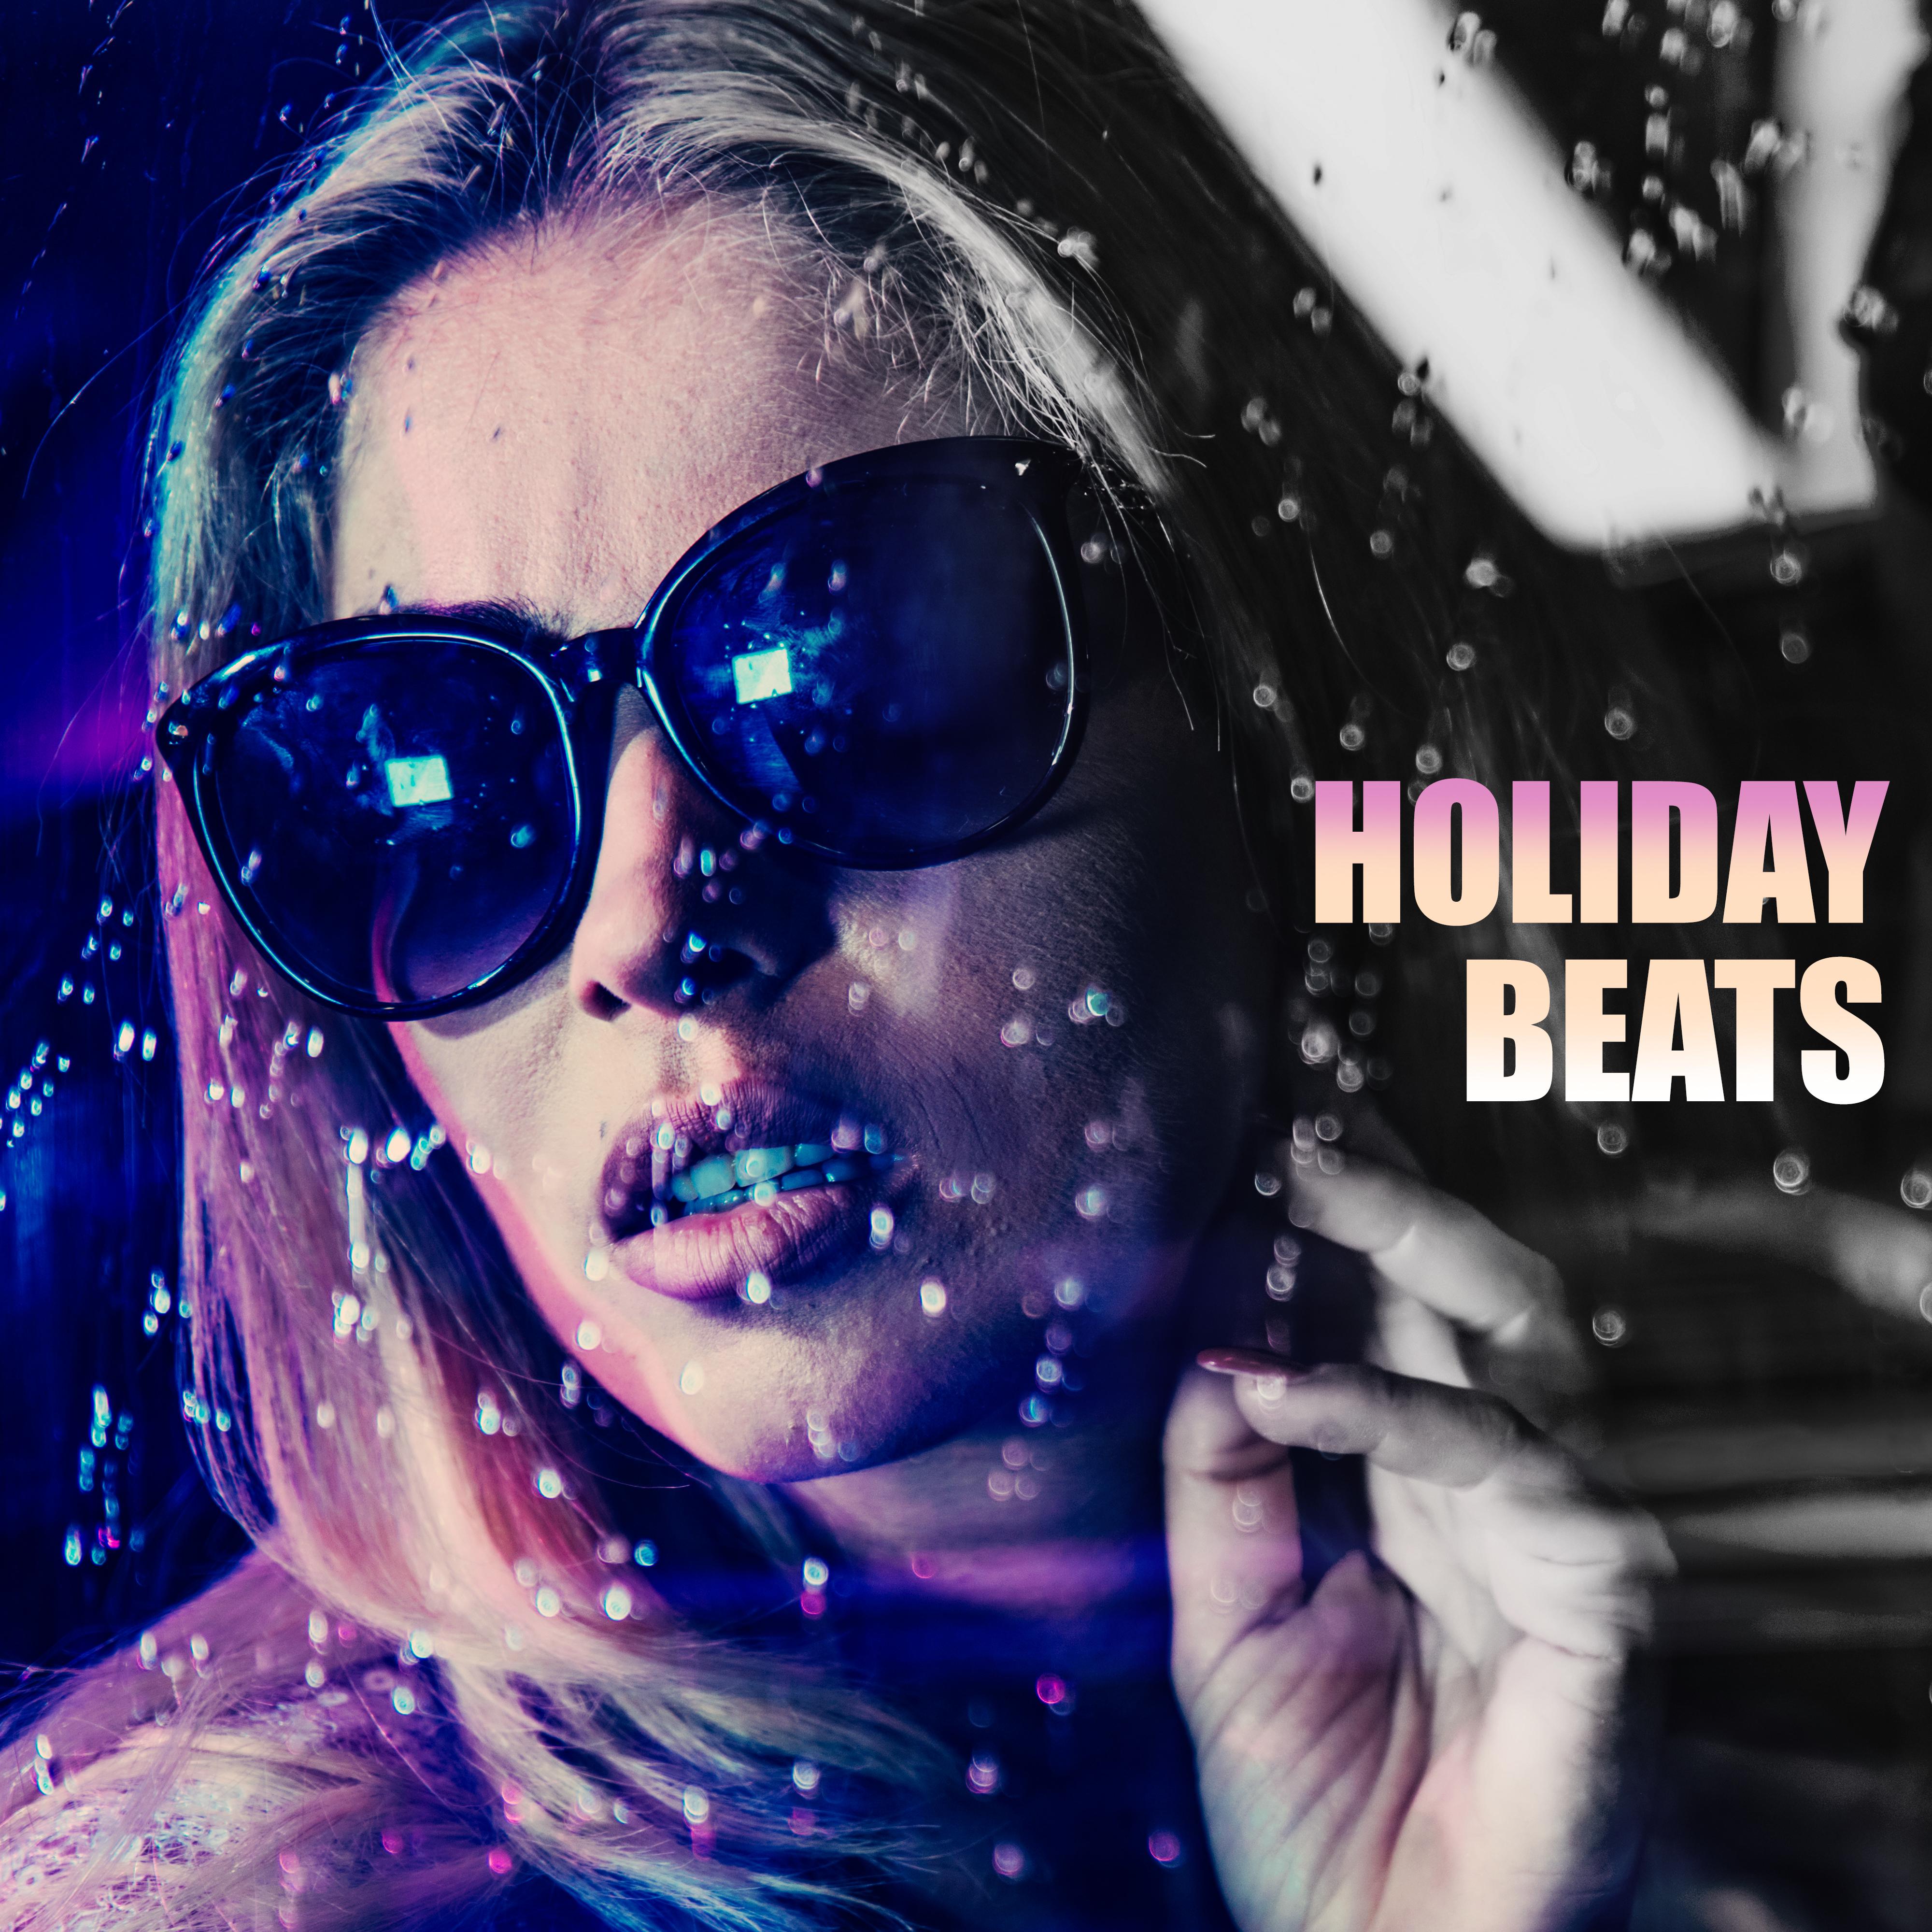 Holiday Beats: Chillout Hits 2019, Ibiza Dance Party, Chillout Summer Tunes, Dance Music, Sunny Chill Out 2019